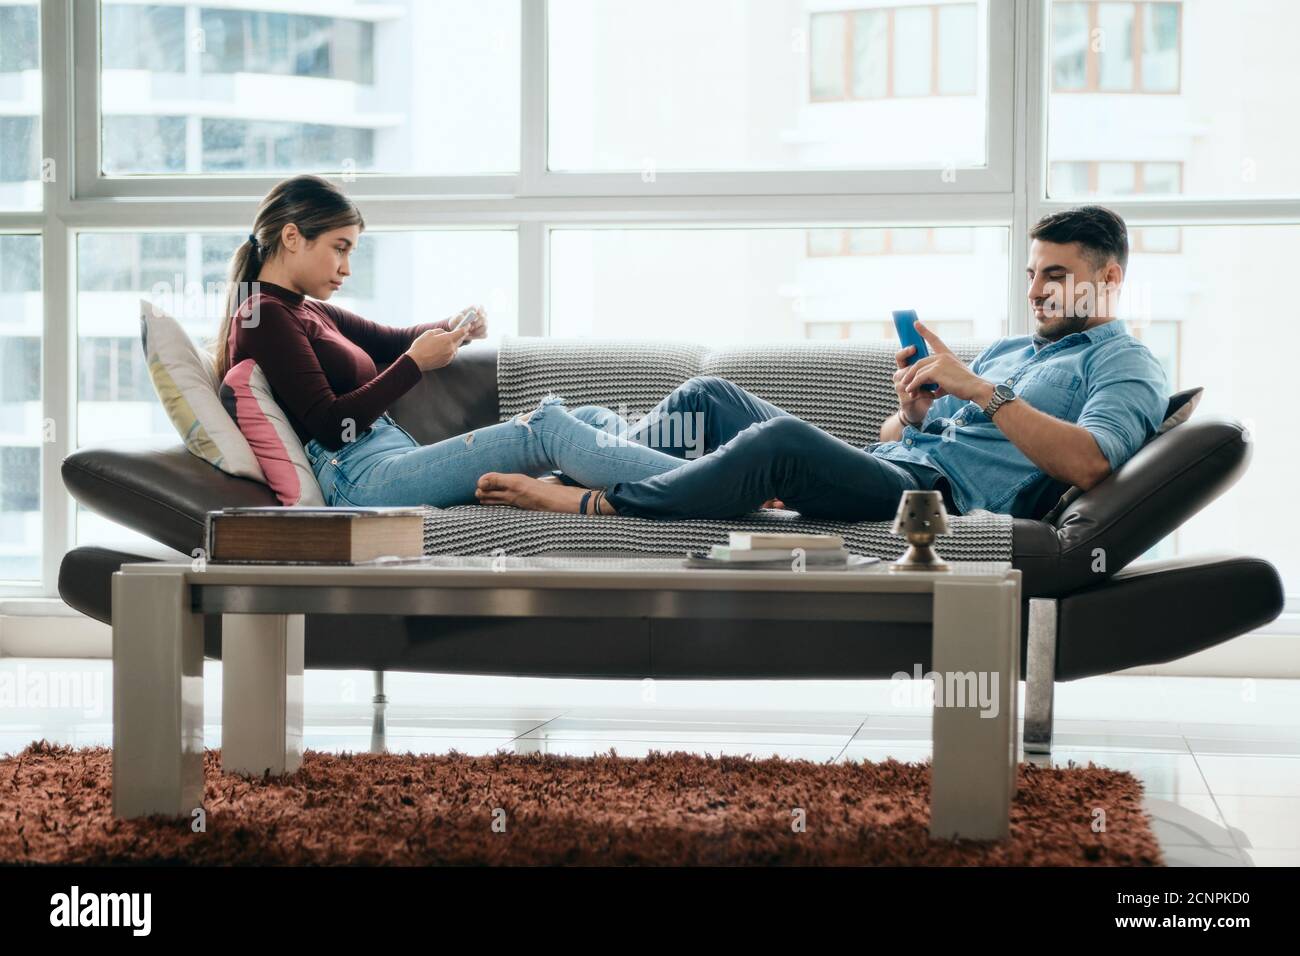 Bored Partners Ignoring Each Other With Mobile Phones Stock Photo